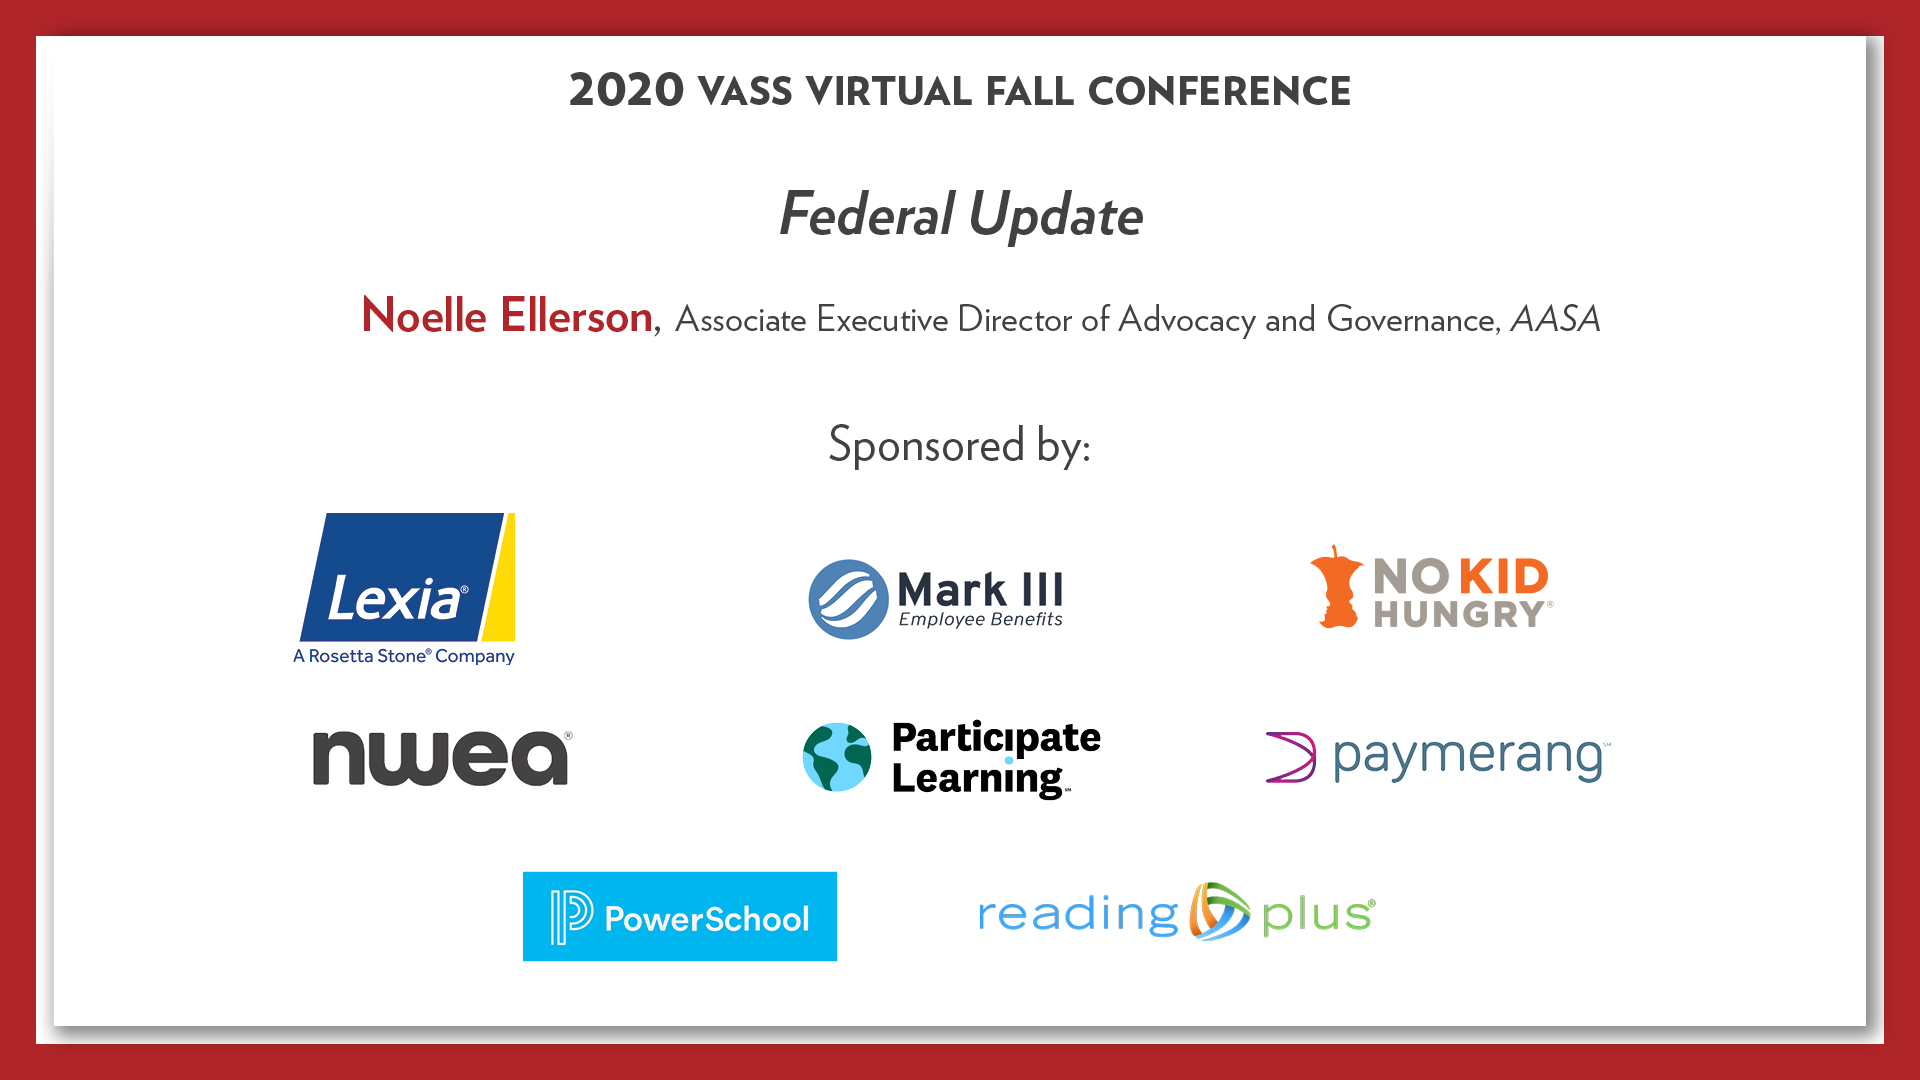 Resources from the 2020 VASS Fall Virtual Conference